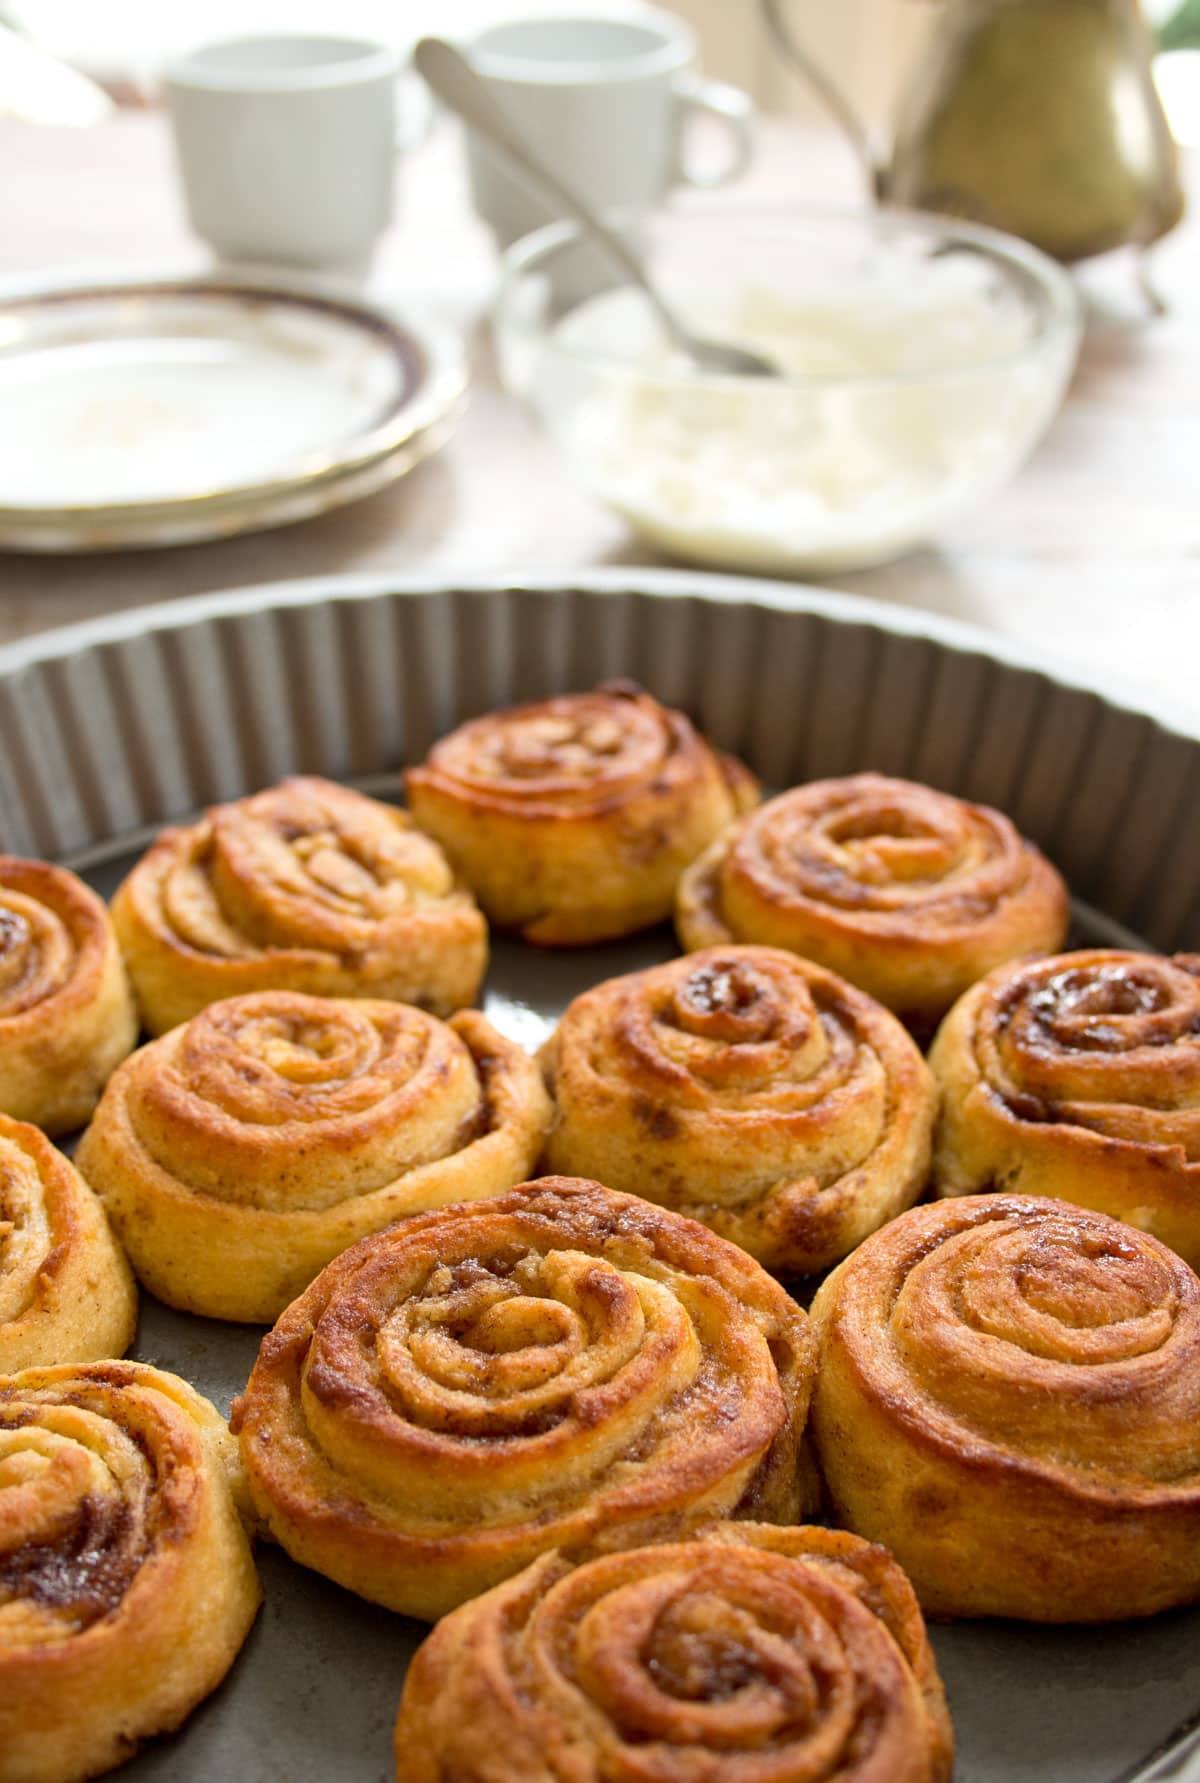 A baking tray with cinnamon rolls.